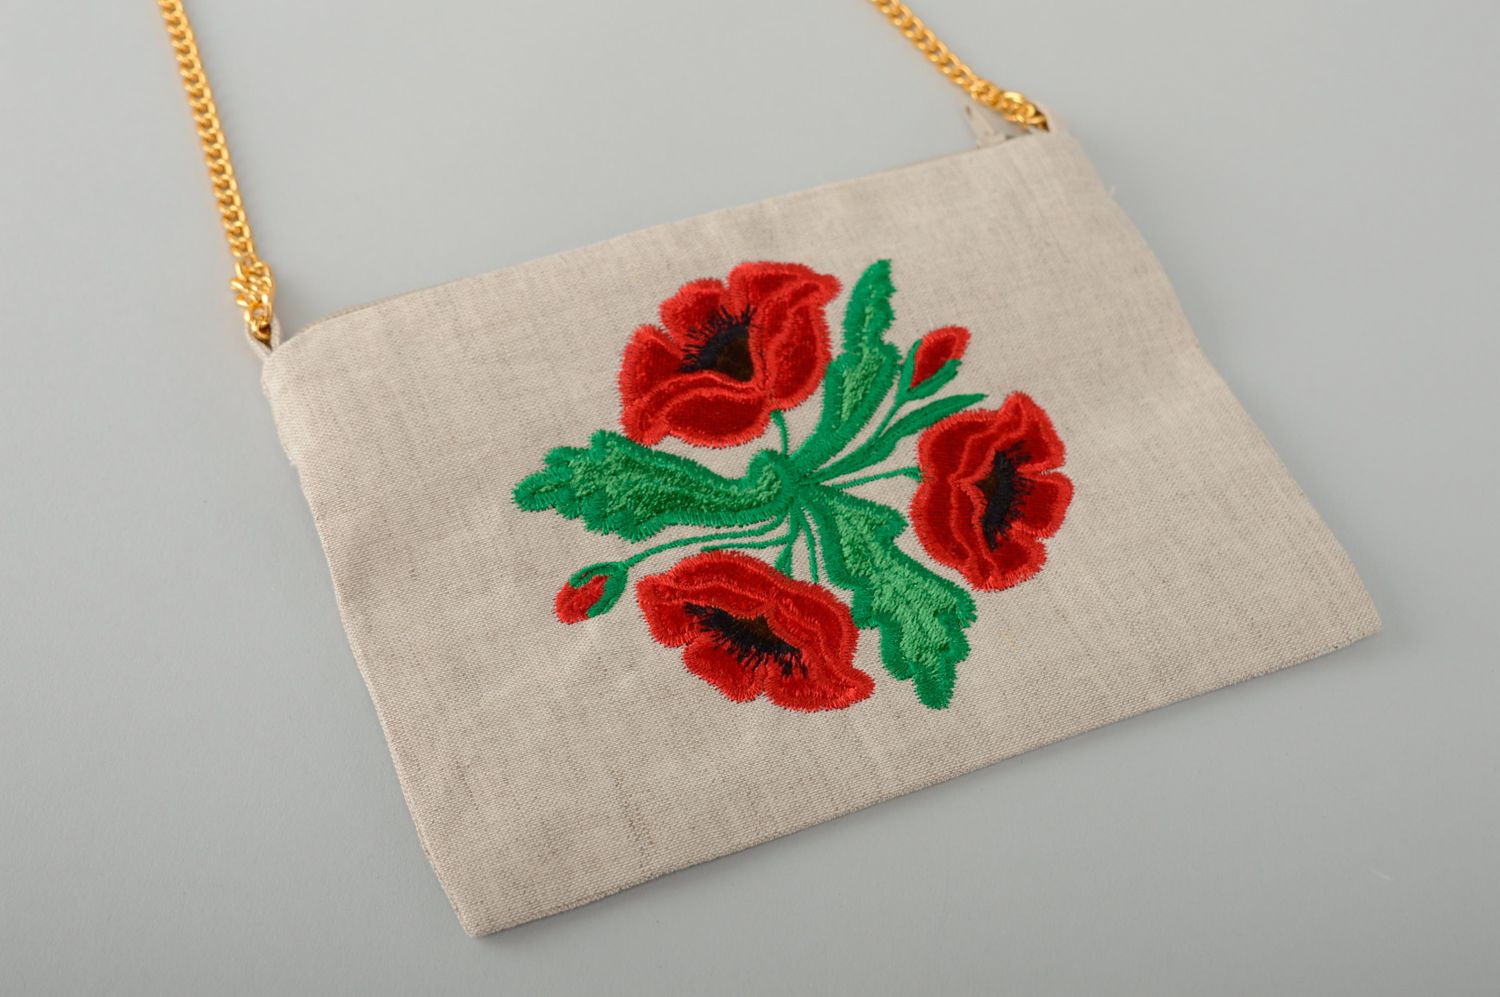 Handmade linen clutch bag with embroidery and applique work Poppies photo 1